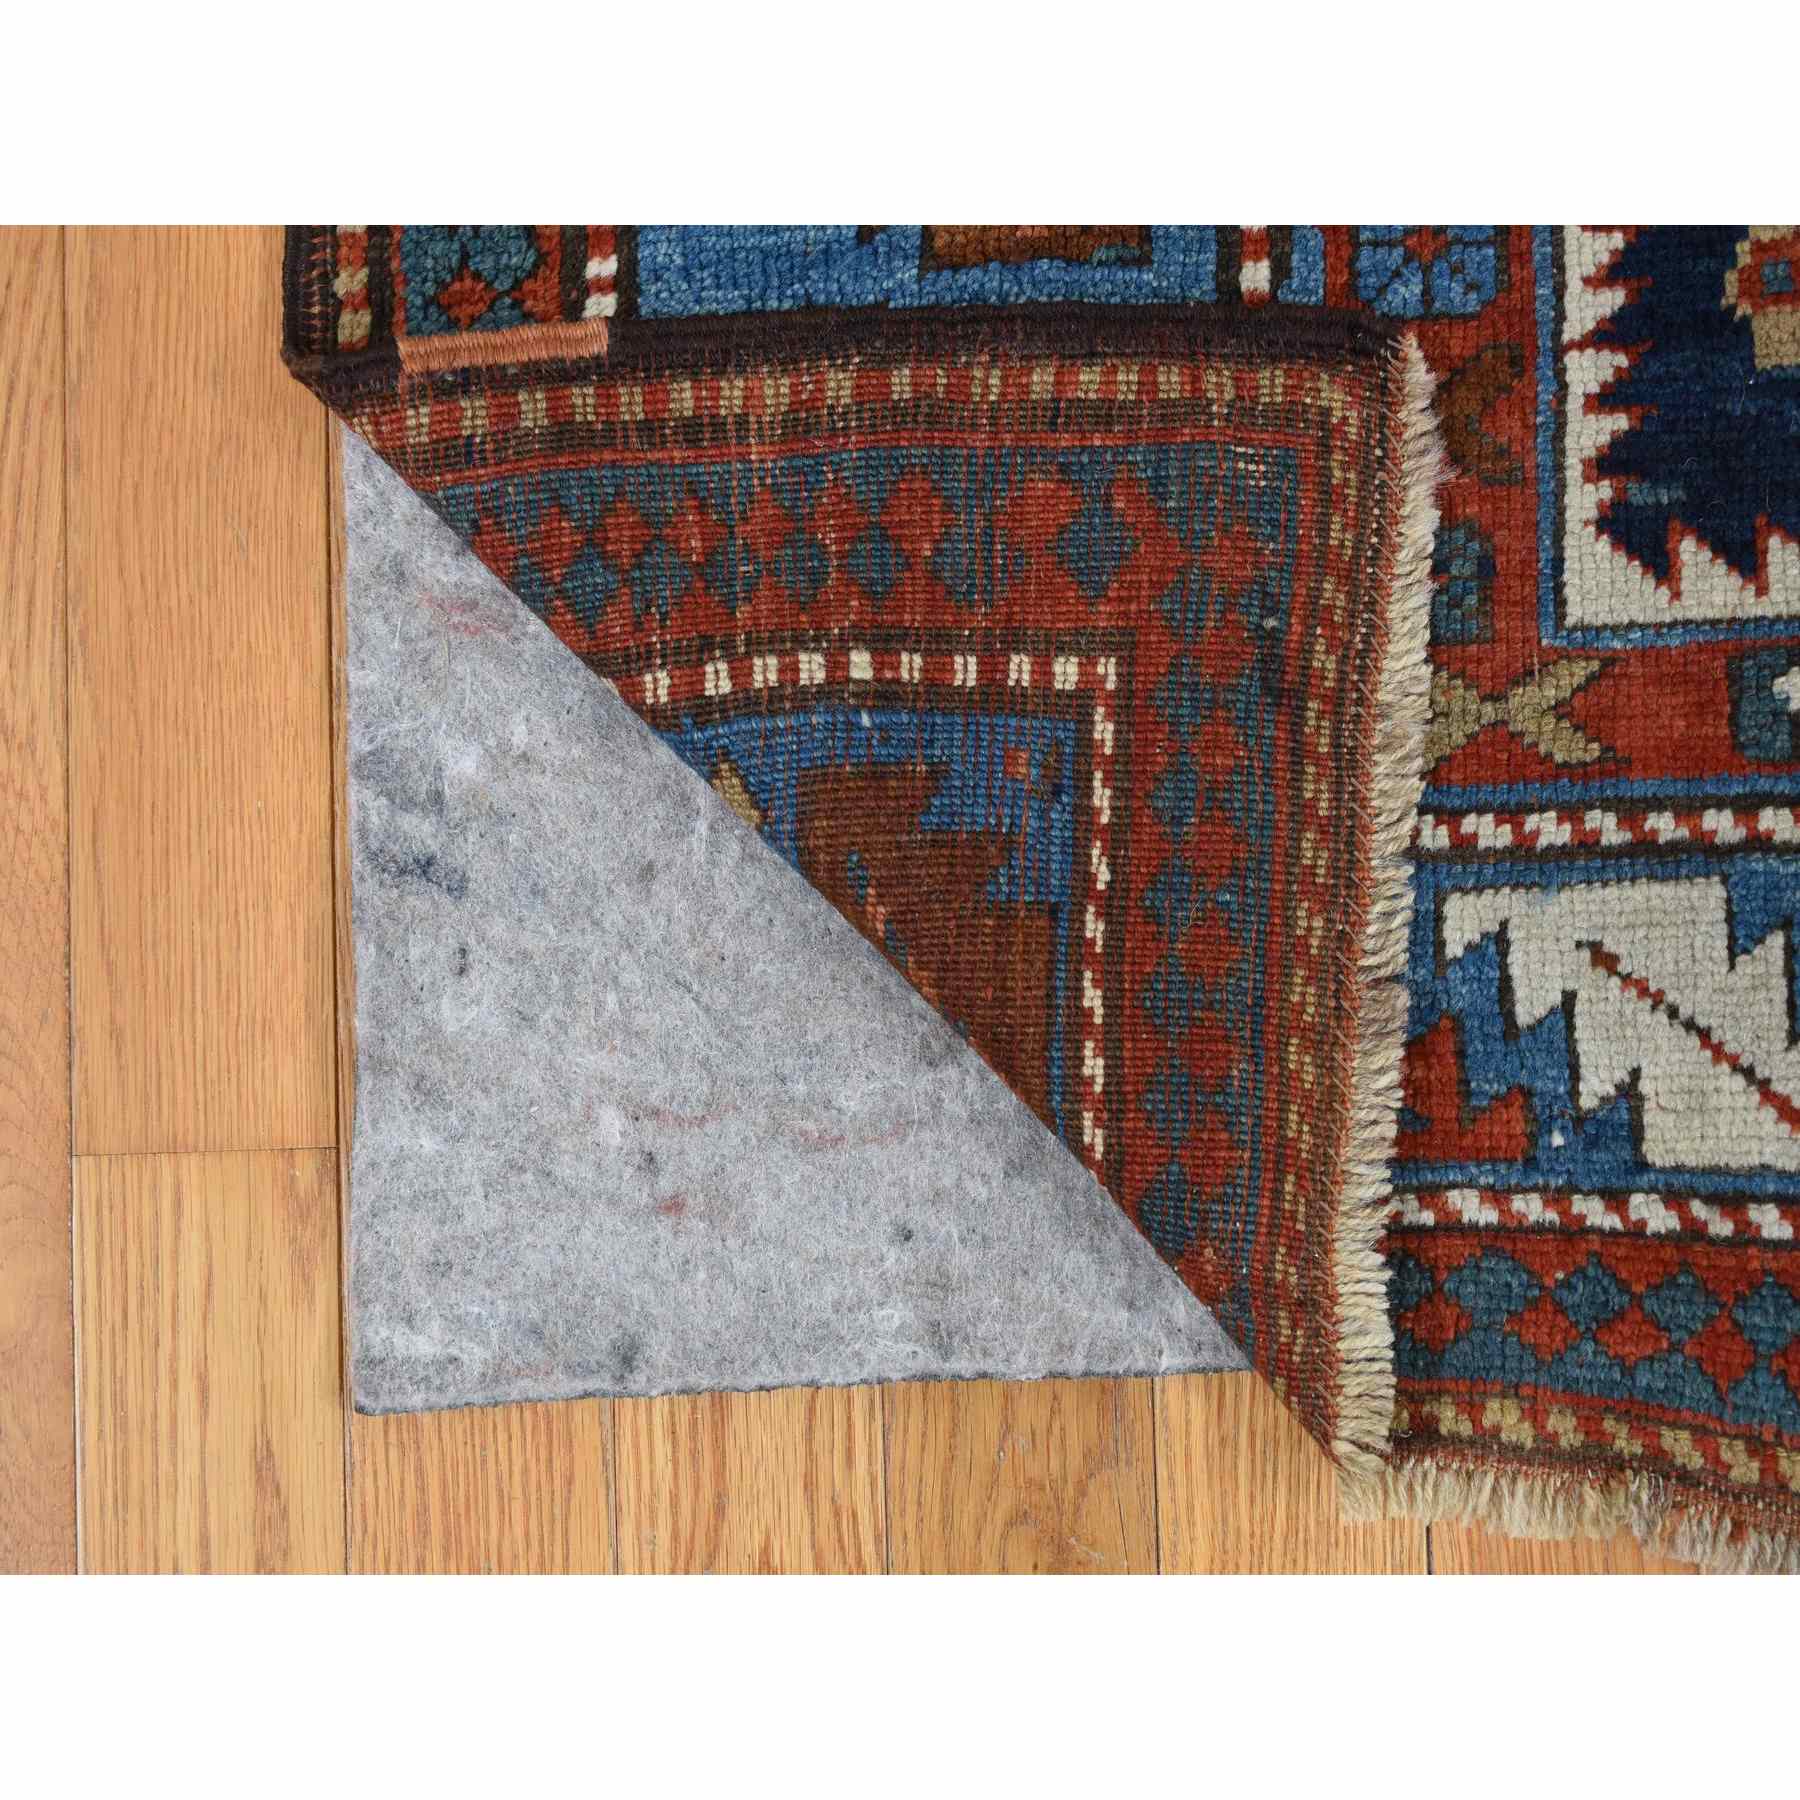 Antique-Hand-Knotted-Rug-390300